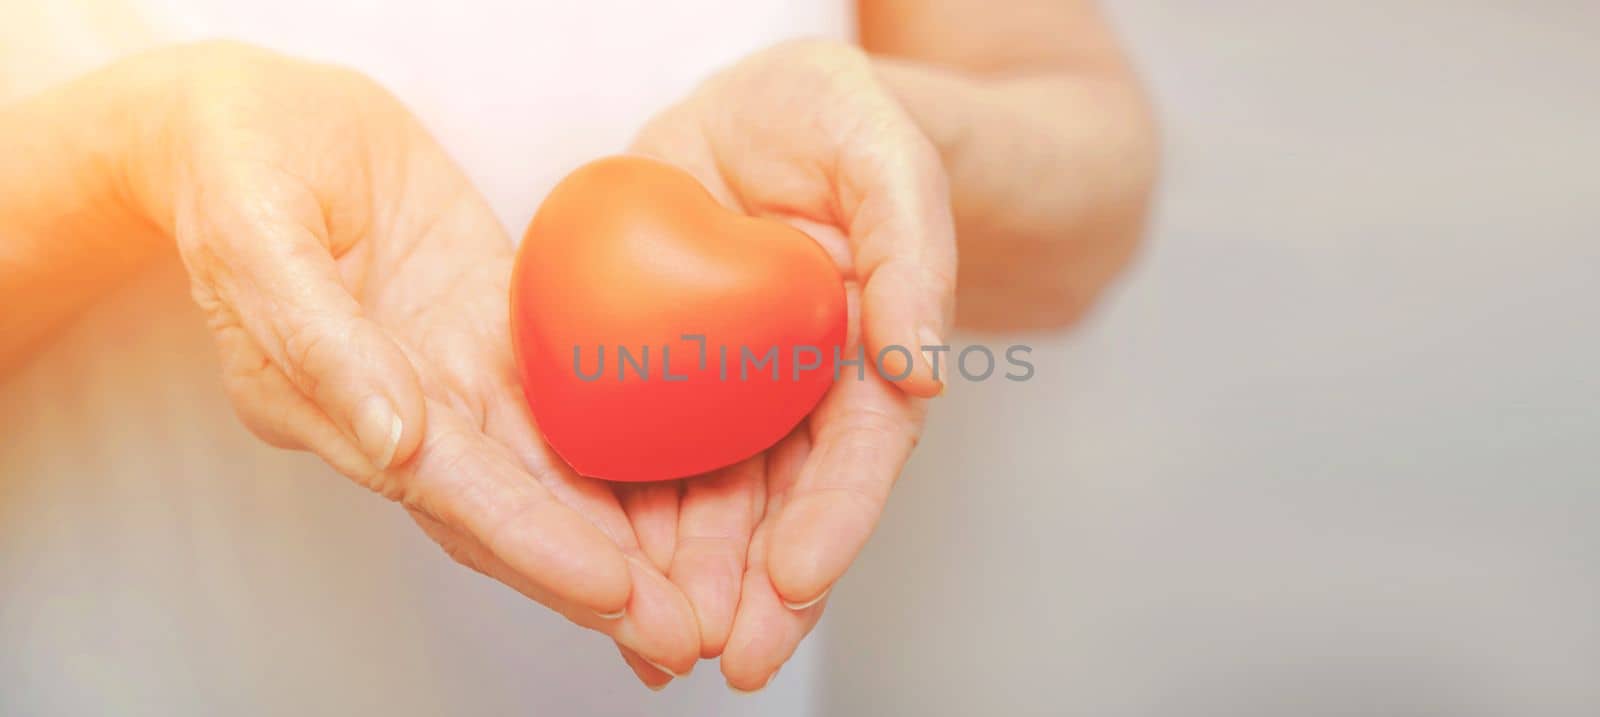 Grandmother woman hands holding red heart, healthcare, love, organ donation, mindfulness, wellbeing, family insurance and CSR concept, world heart day, world health day, national organ donor day by Matiunina